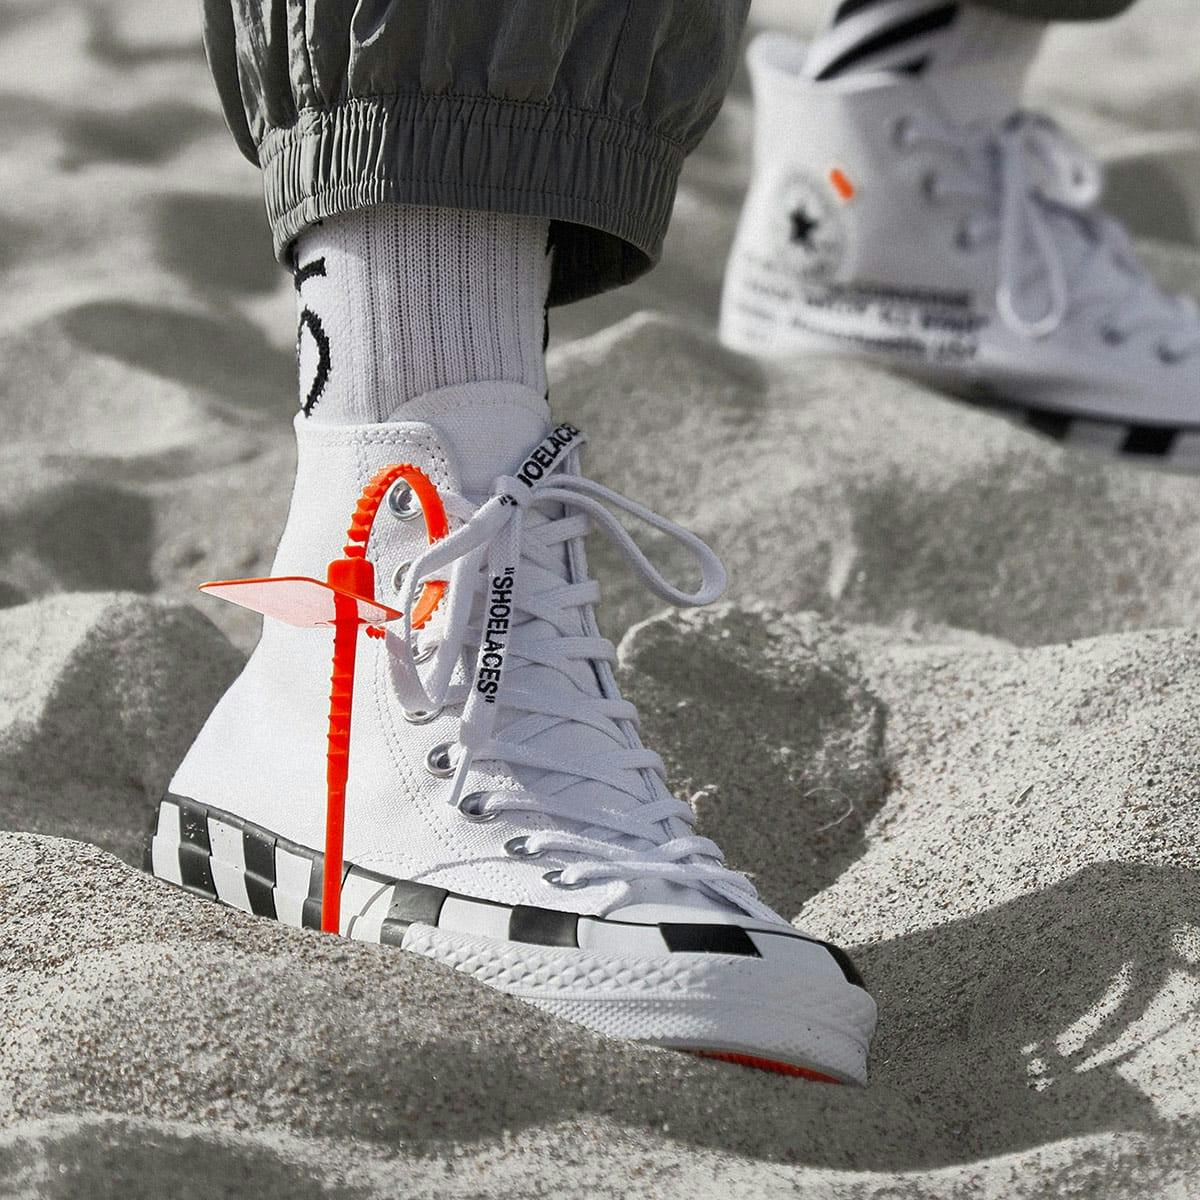 Converse Chuck 70 x Off-White - Register Now on END. (US) Launches | END.